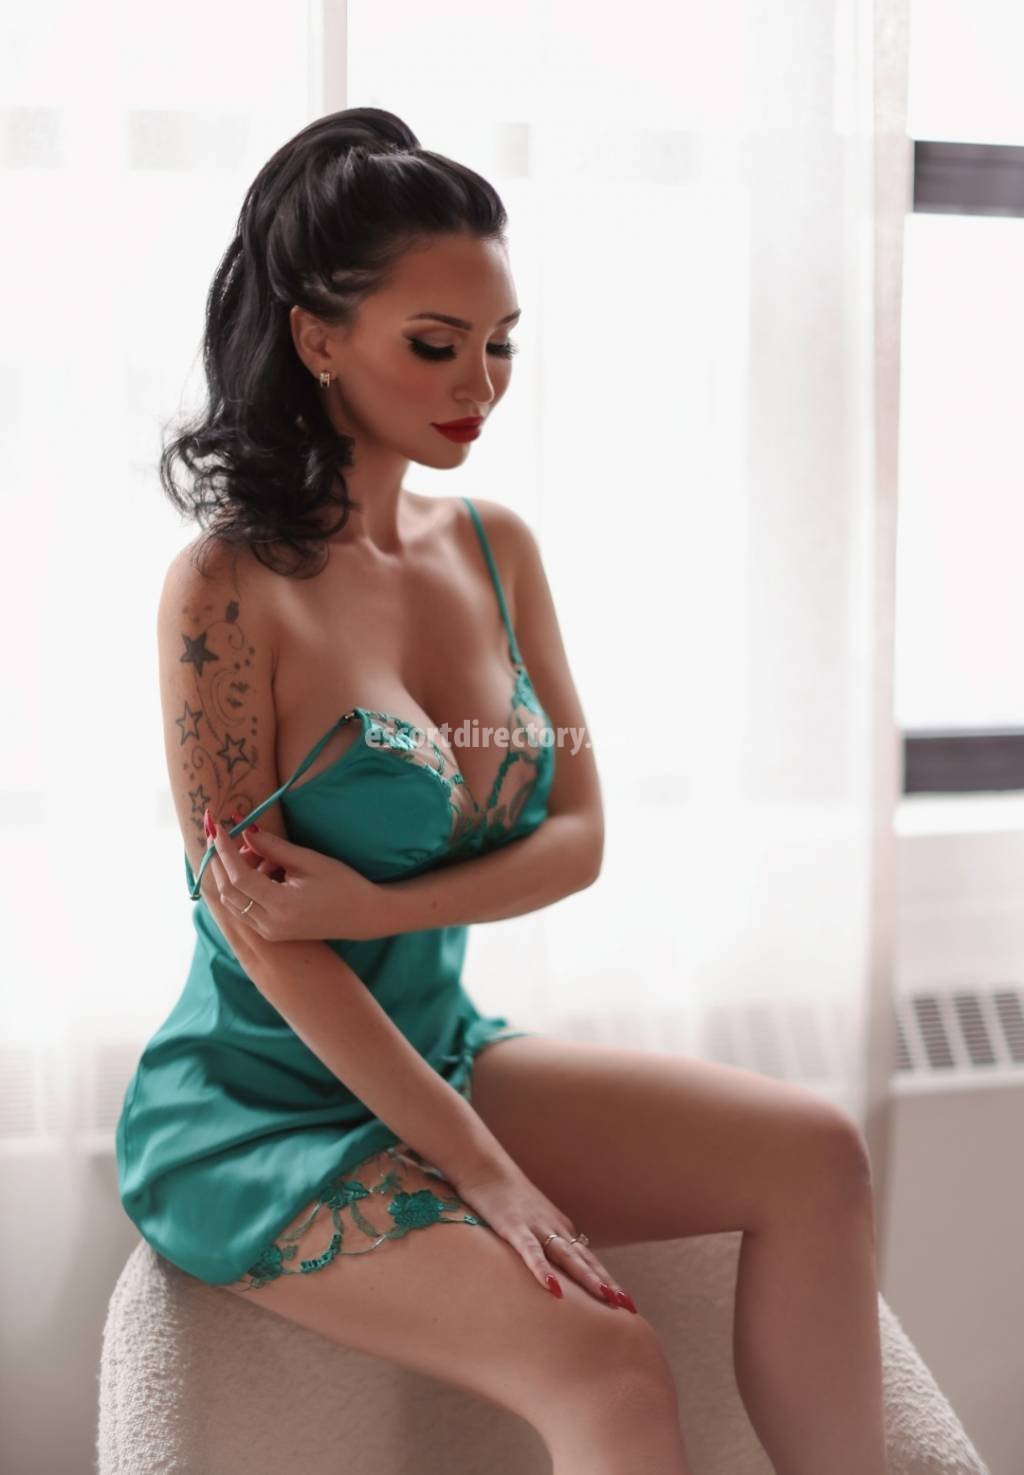 Anna-Belle escort in Montreal offers Handjob services